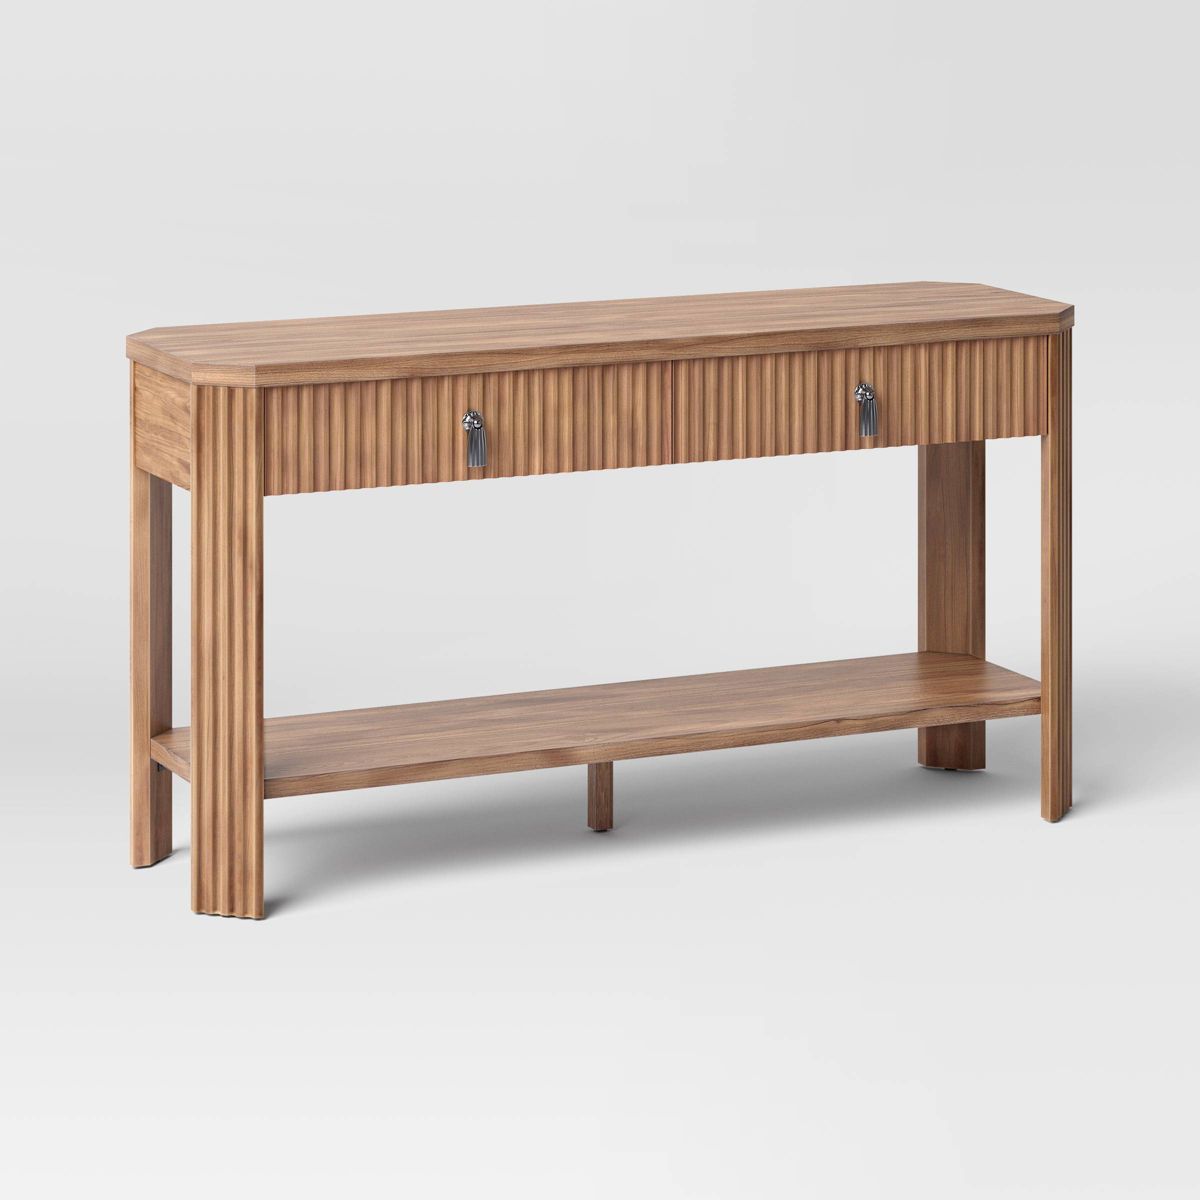 Laguna Nigel Fluted Wooden Console Table Brown - Threshold™ designed with Studio McGee | Target